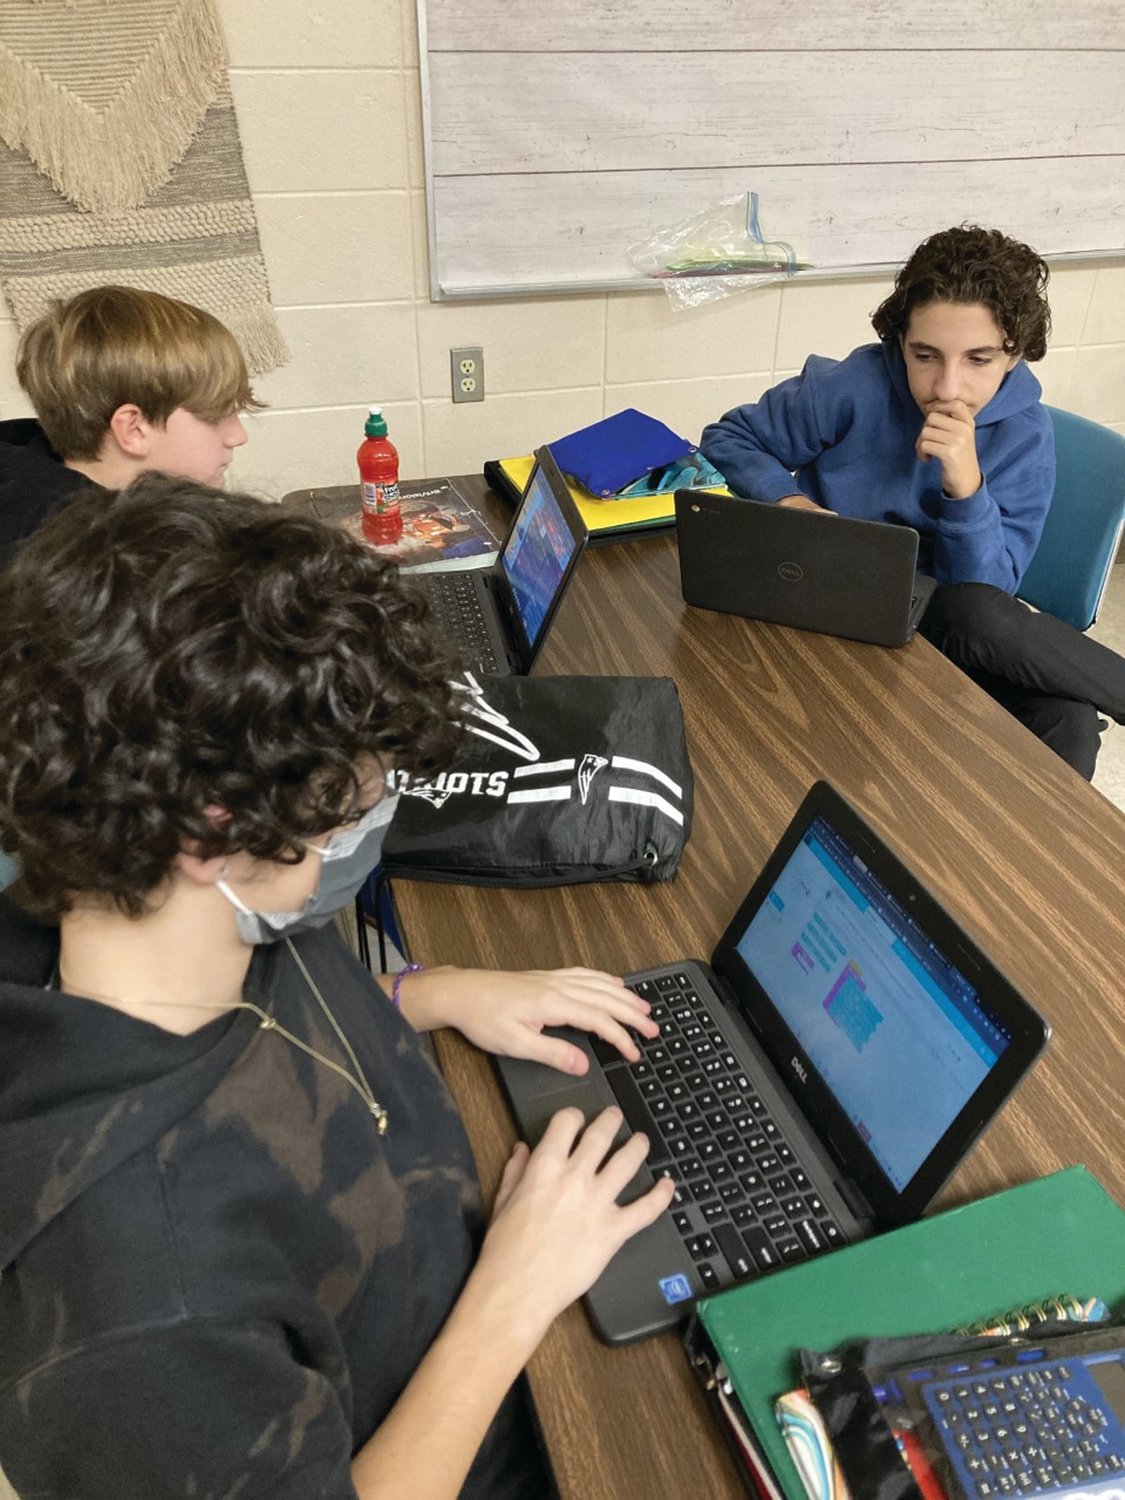 PRIZE WINNERS: Prior to Christmas break, Ferri Middle School students participated in the Hour of Code event.